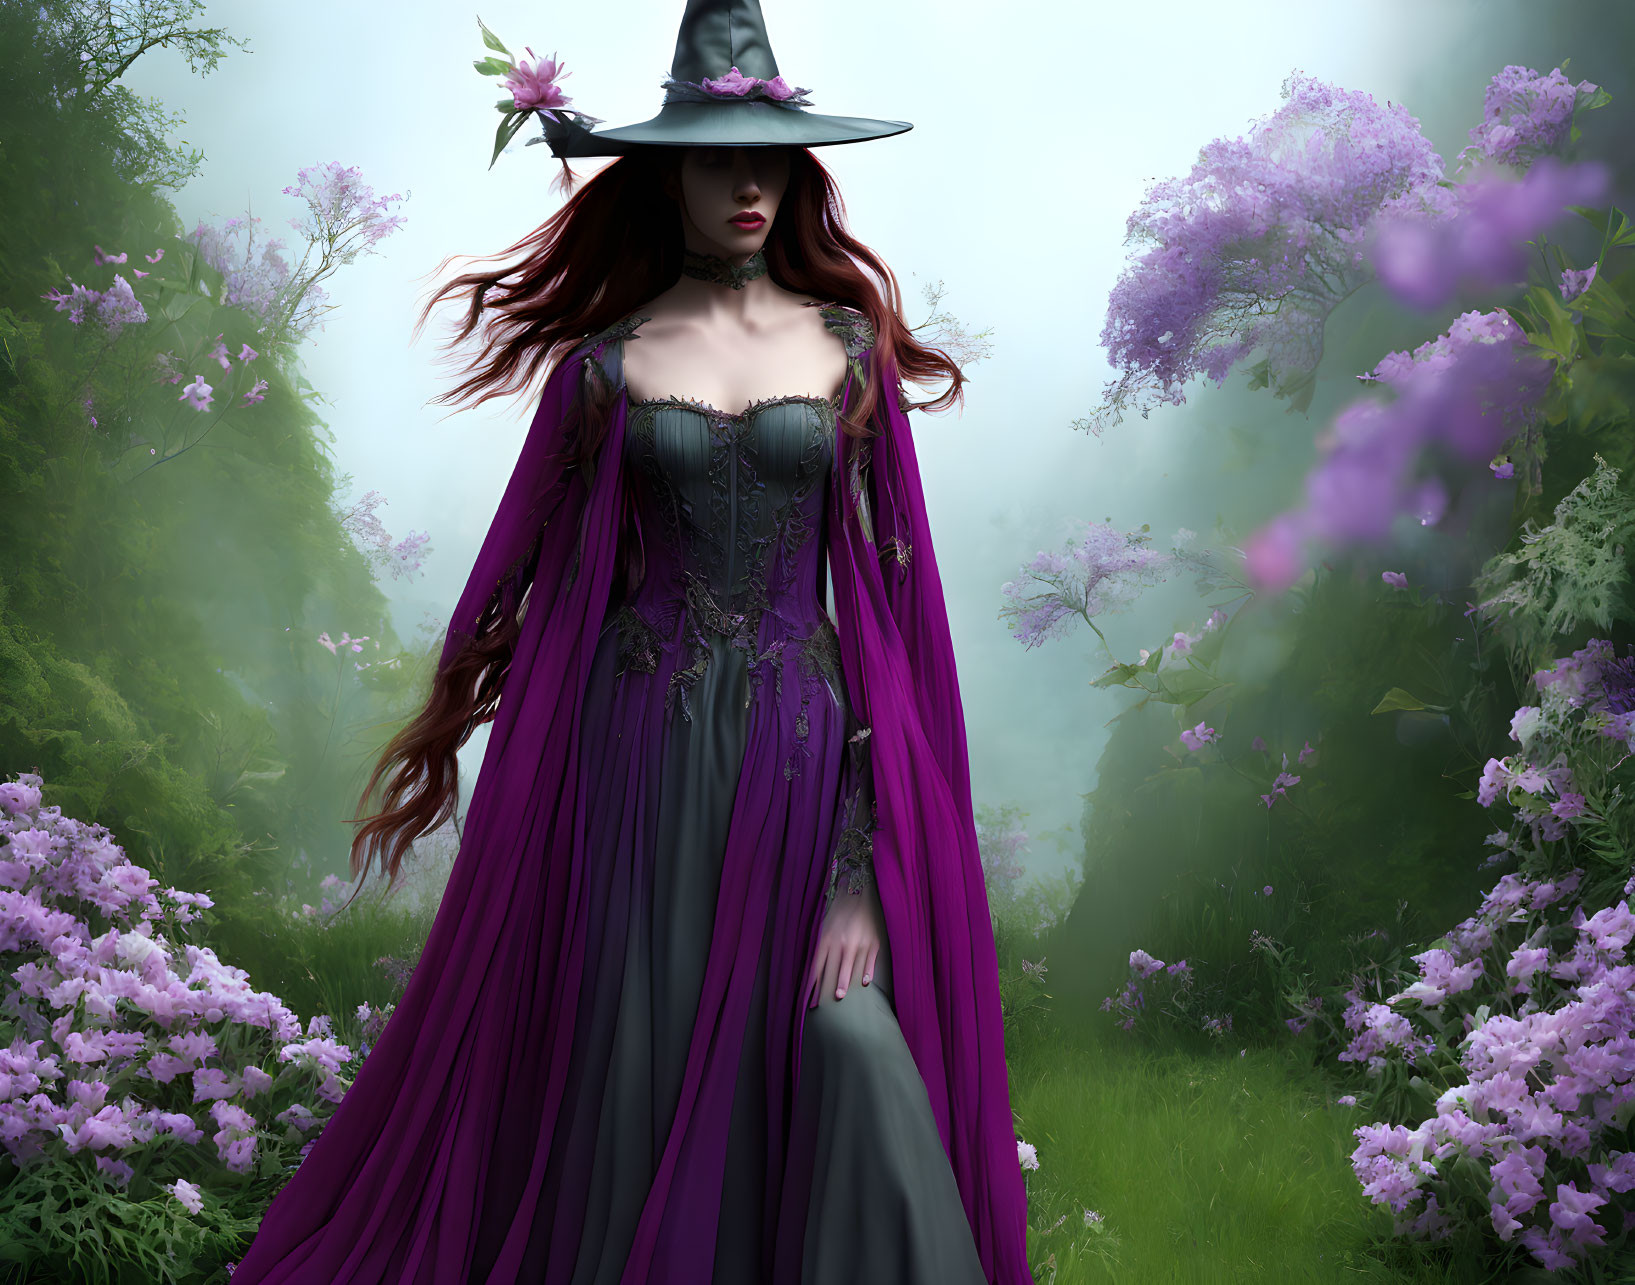 Woman in Purple Cloak and Hat Surrounded by Purple Flowers in Enchanted Forest